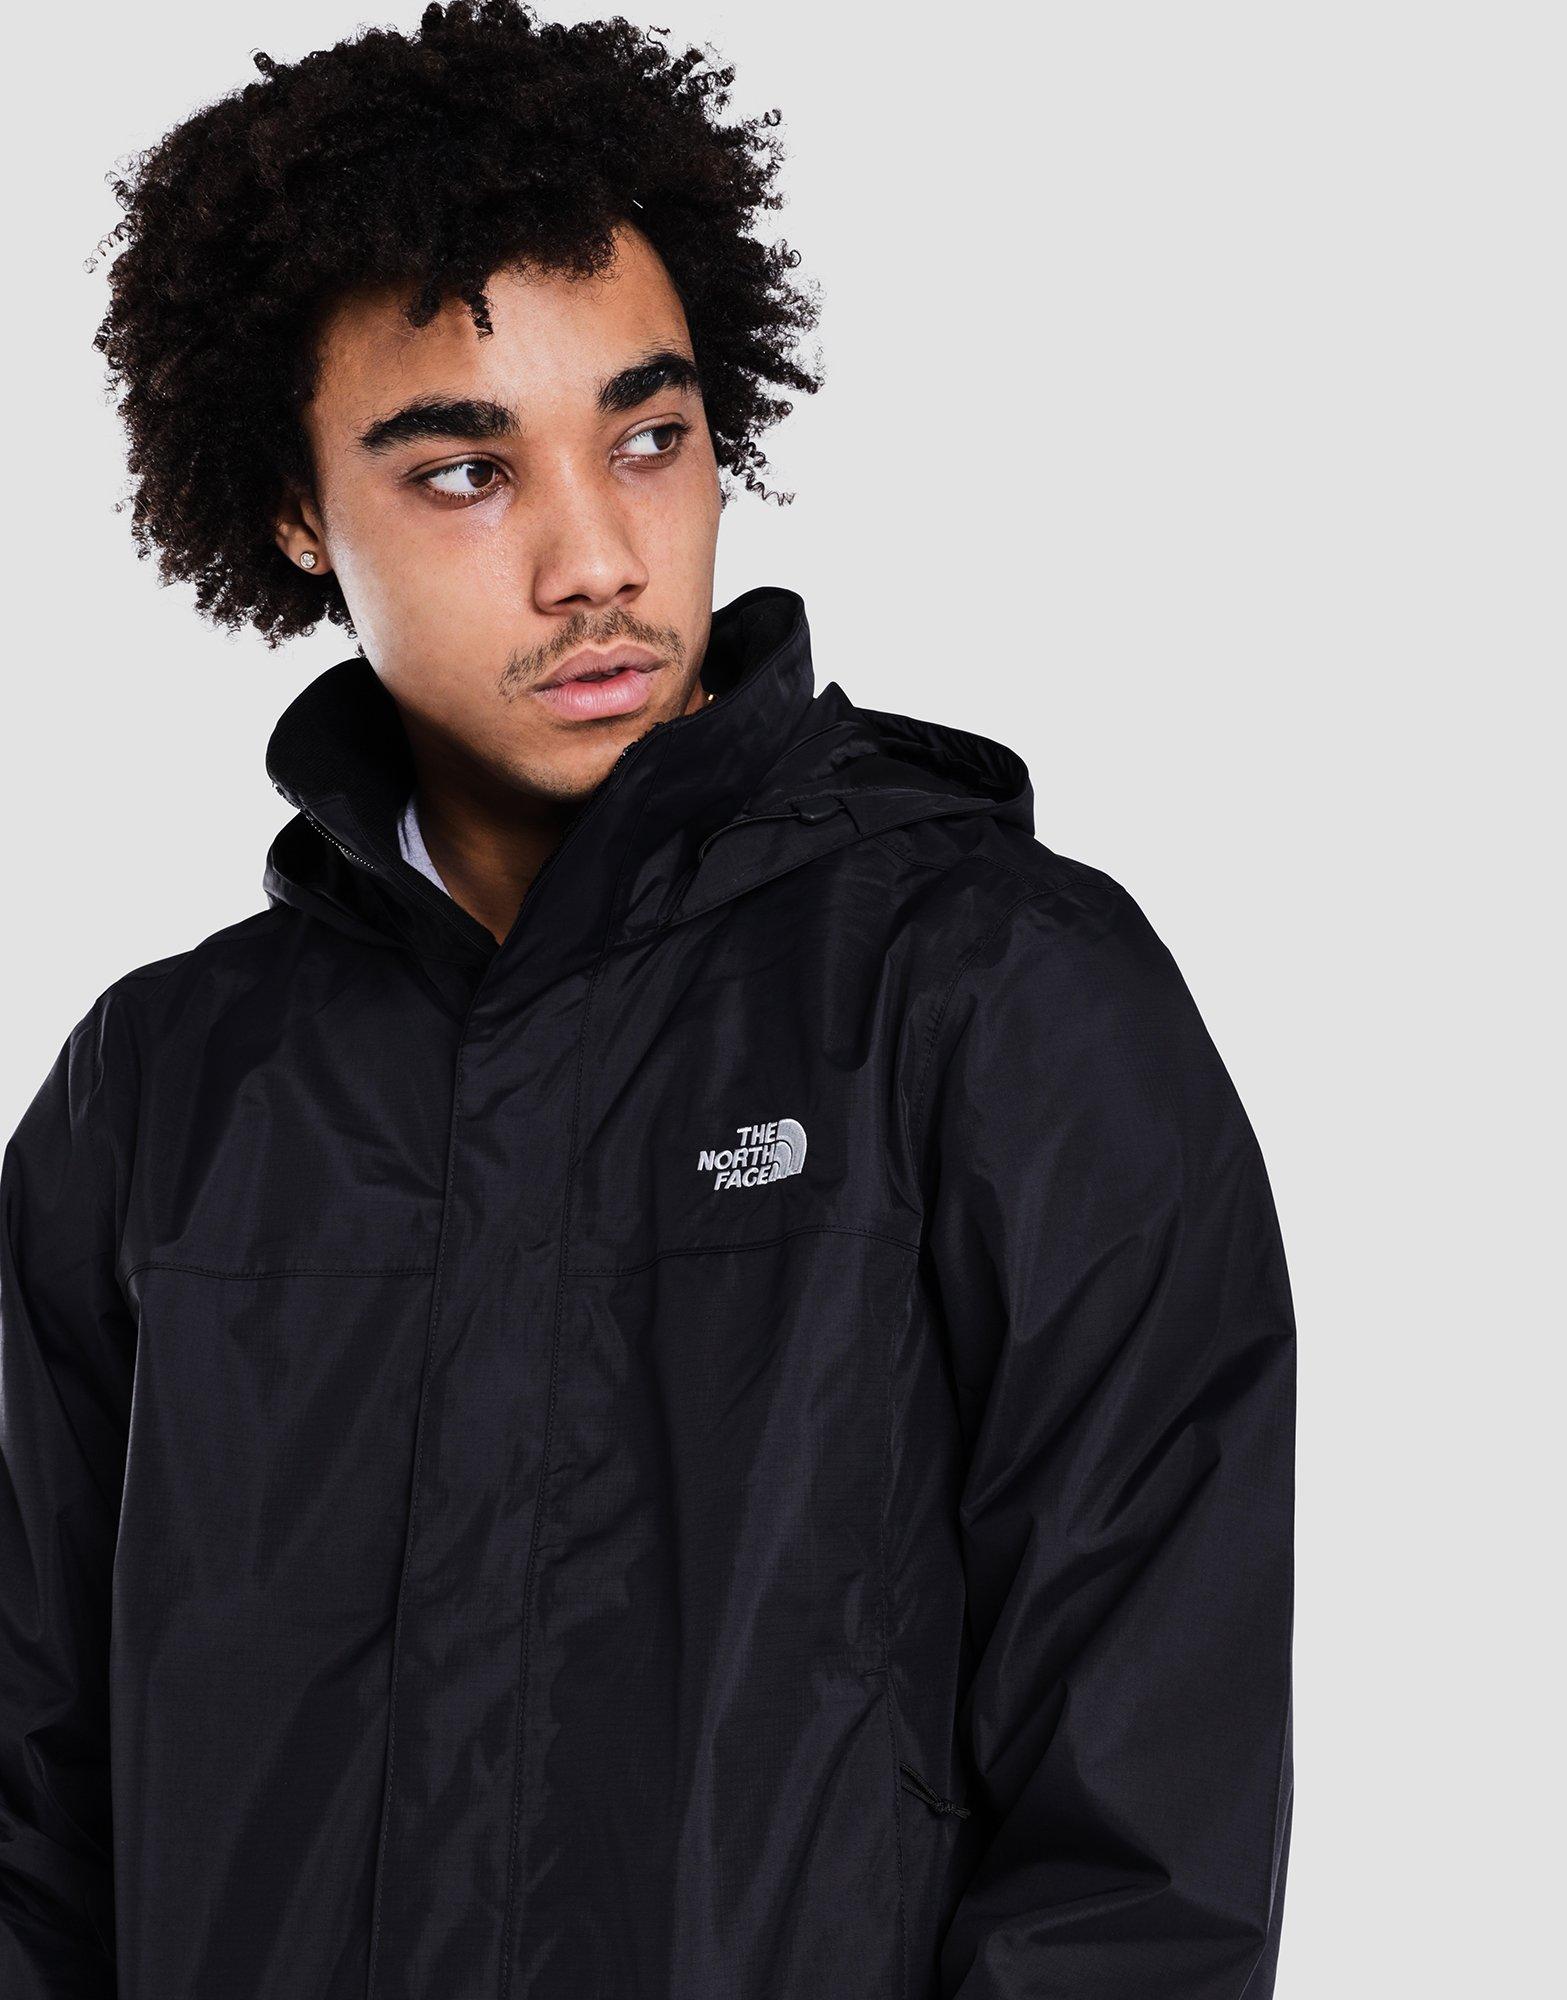 The North Face Resolve 2 Jacket | JD Sports